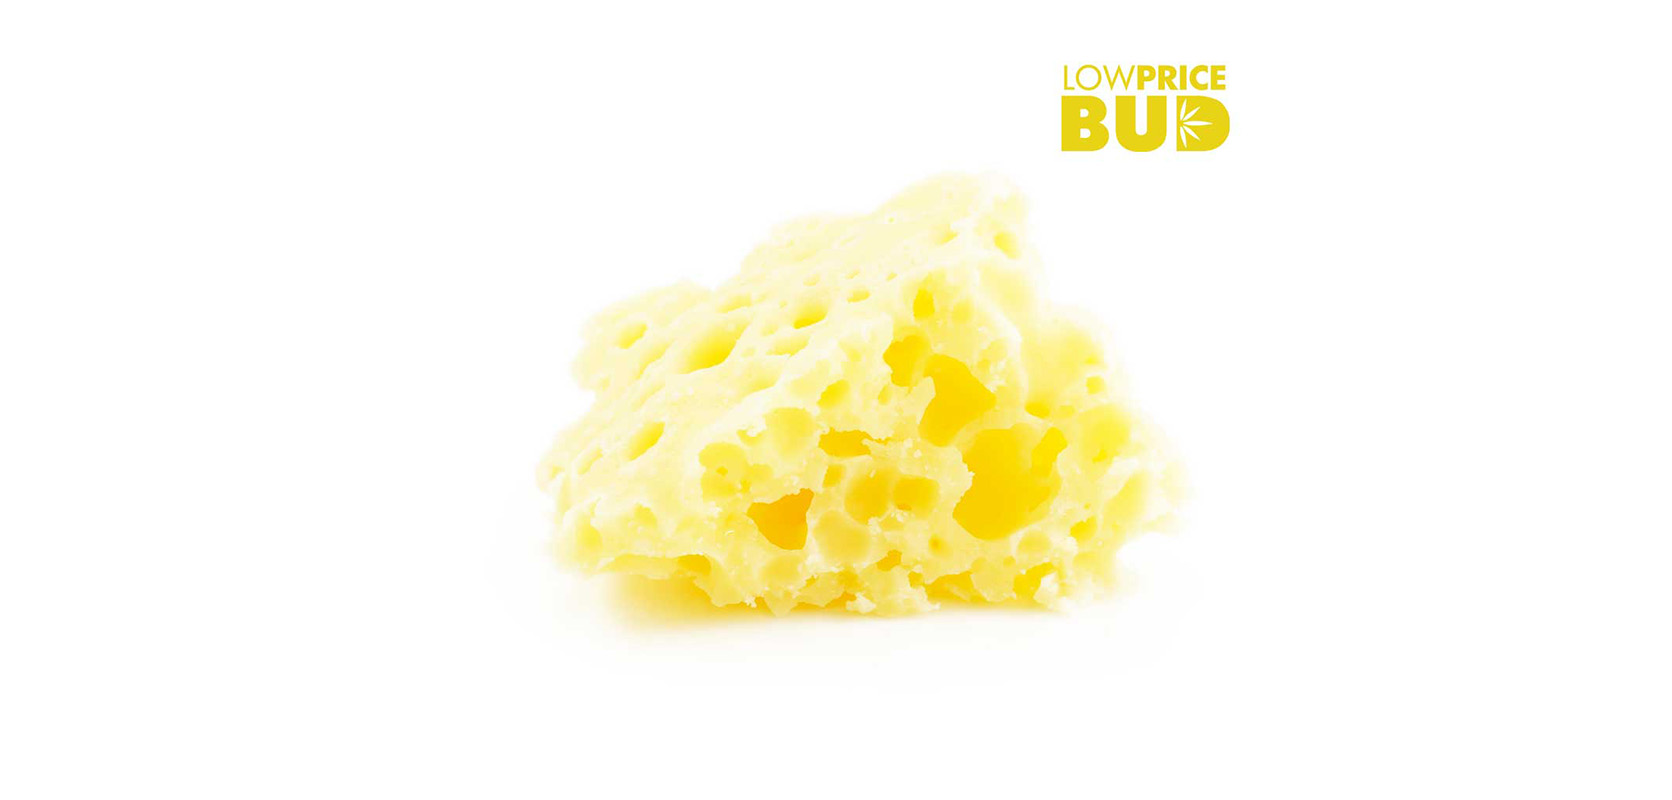 High Voltage 1g live resin for sale. THC concentrates to buy online in Canada from mail order marijuana dispensary for weed online.